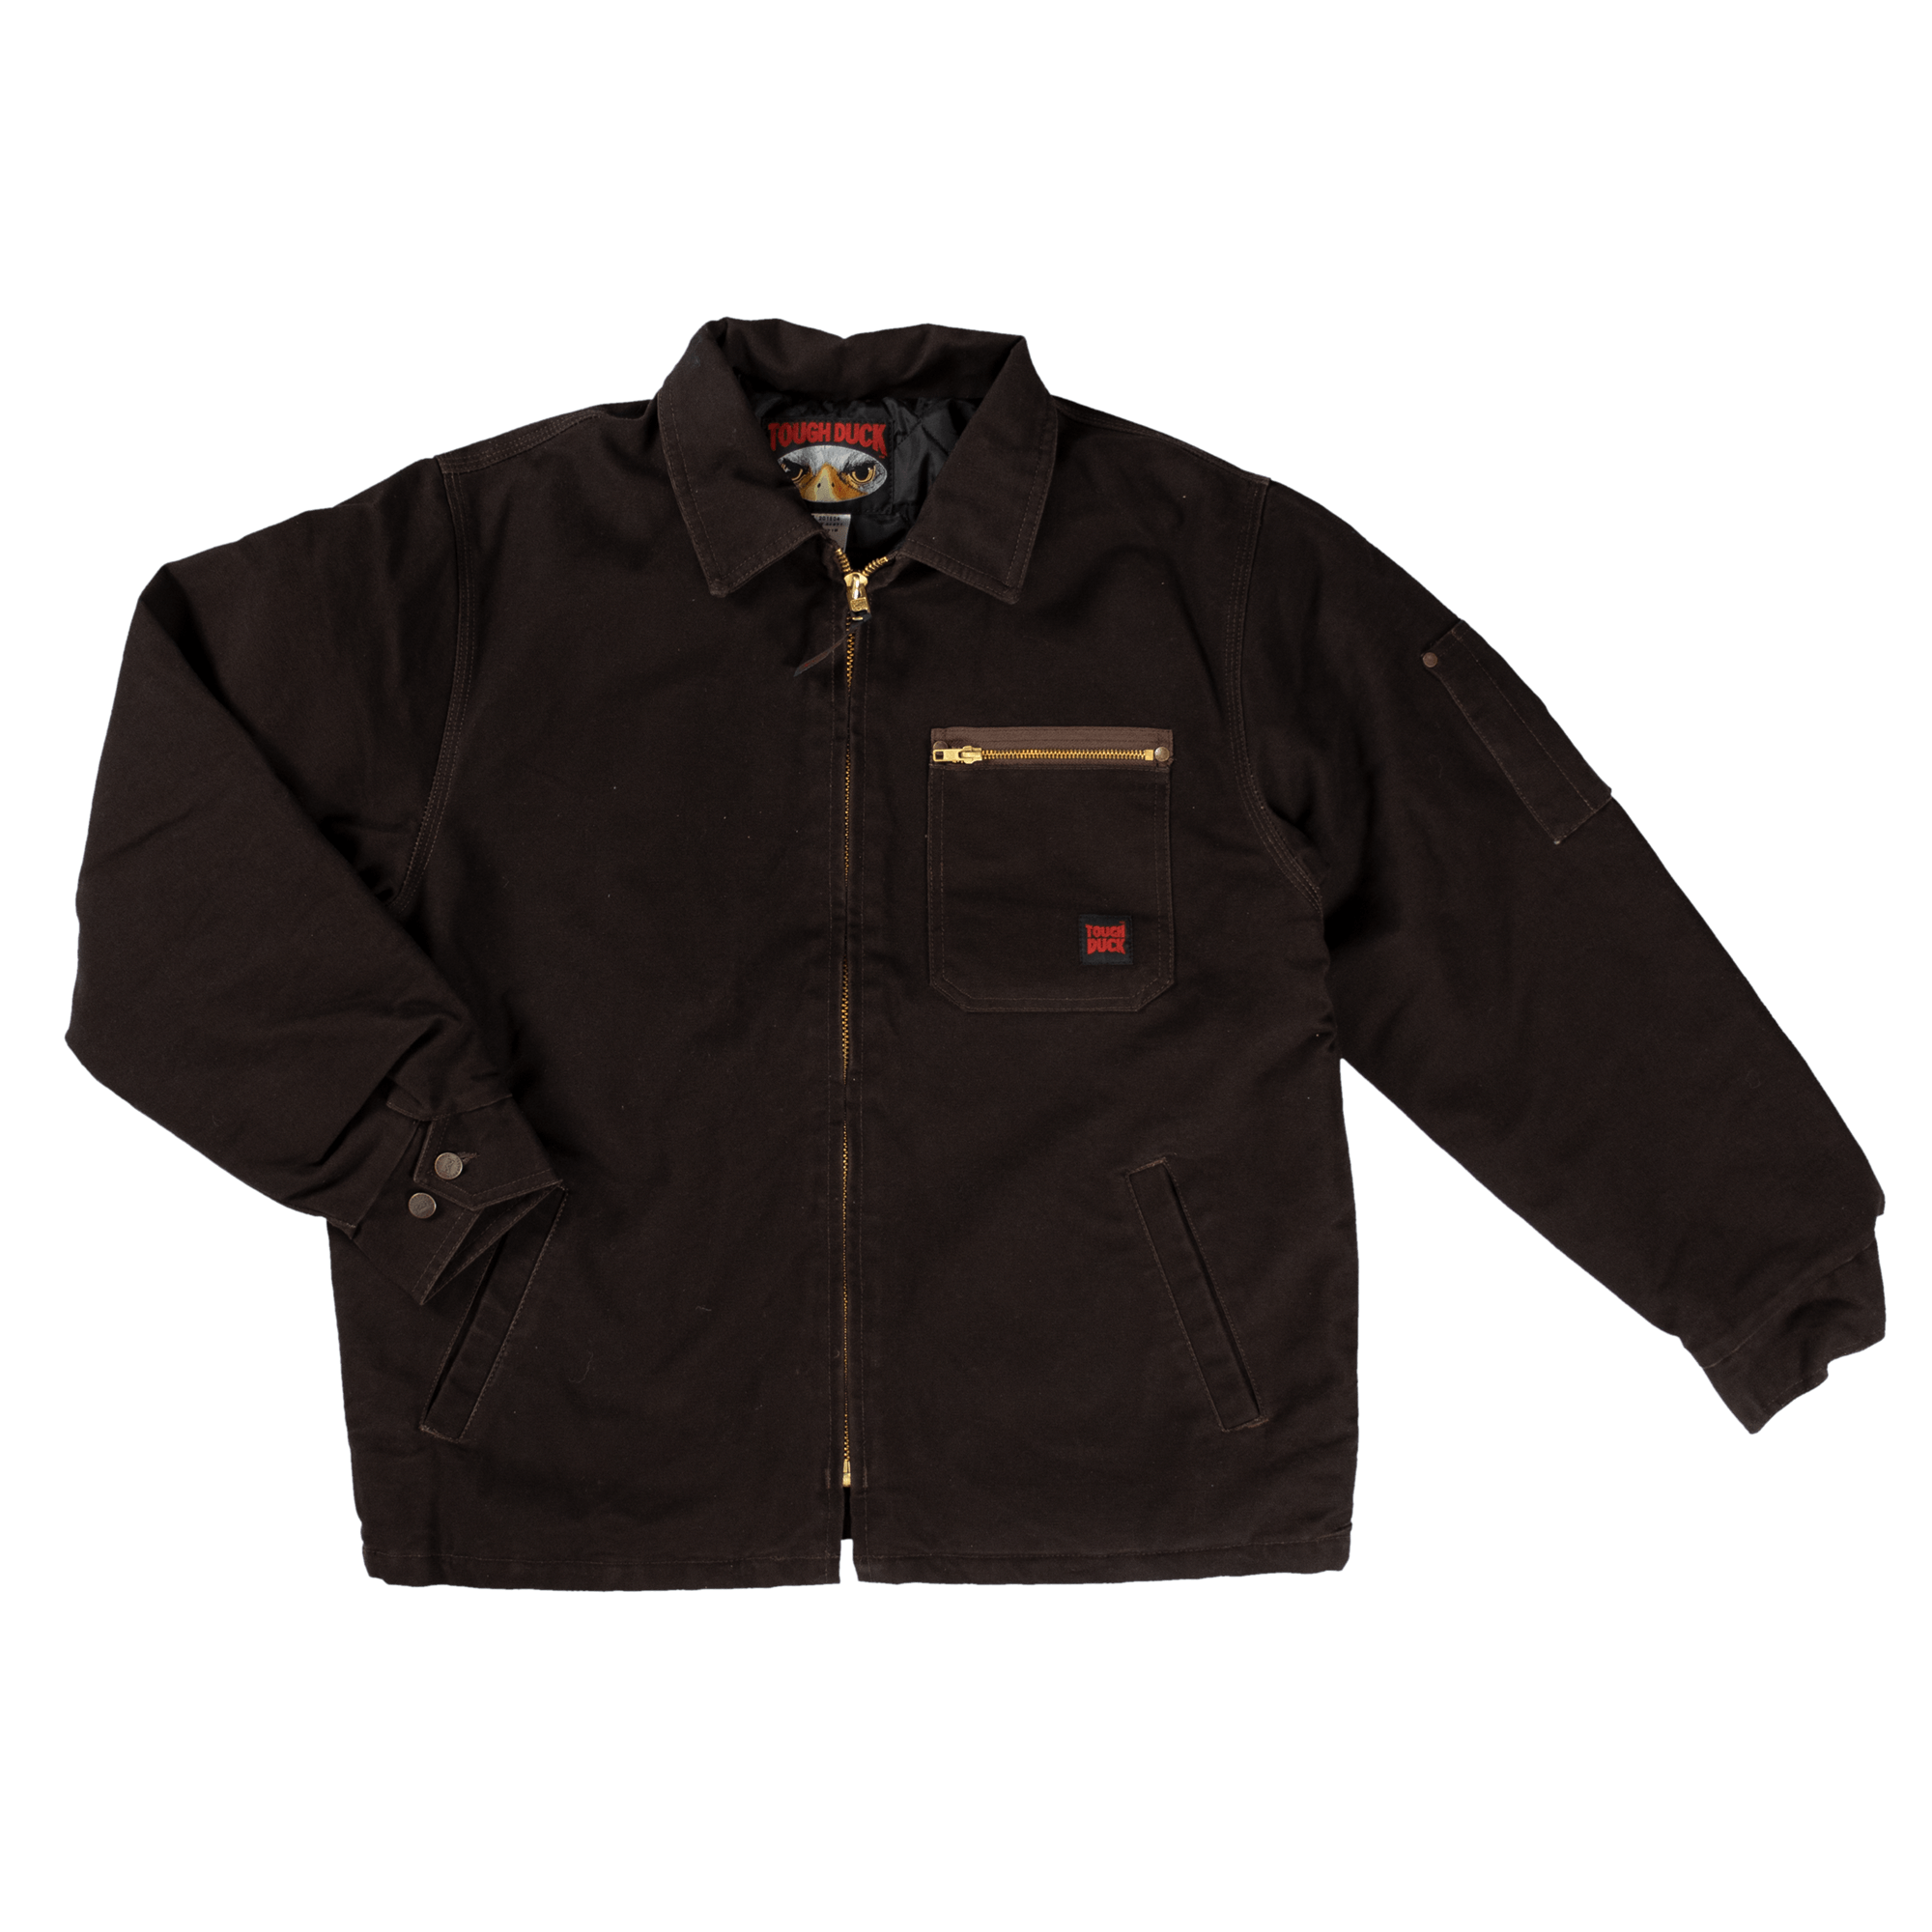 TOUGH DUCK CHORE JACKET - Mucksters Supply Corp